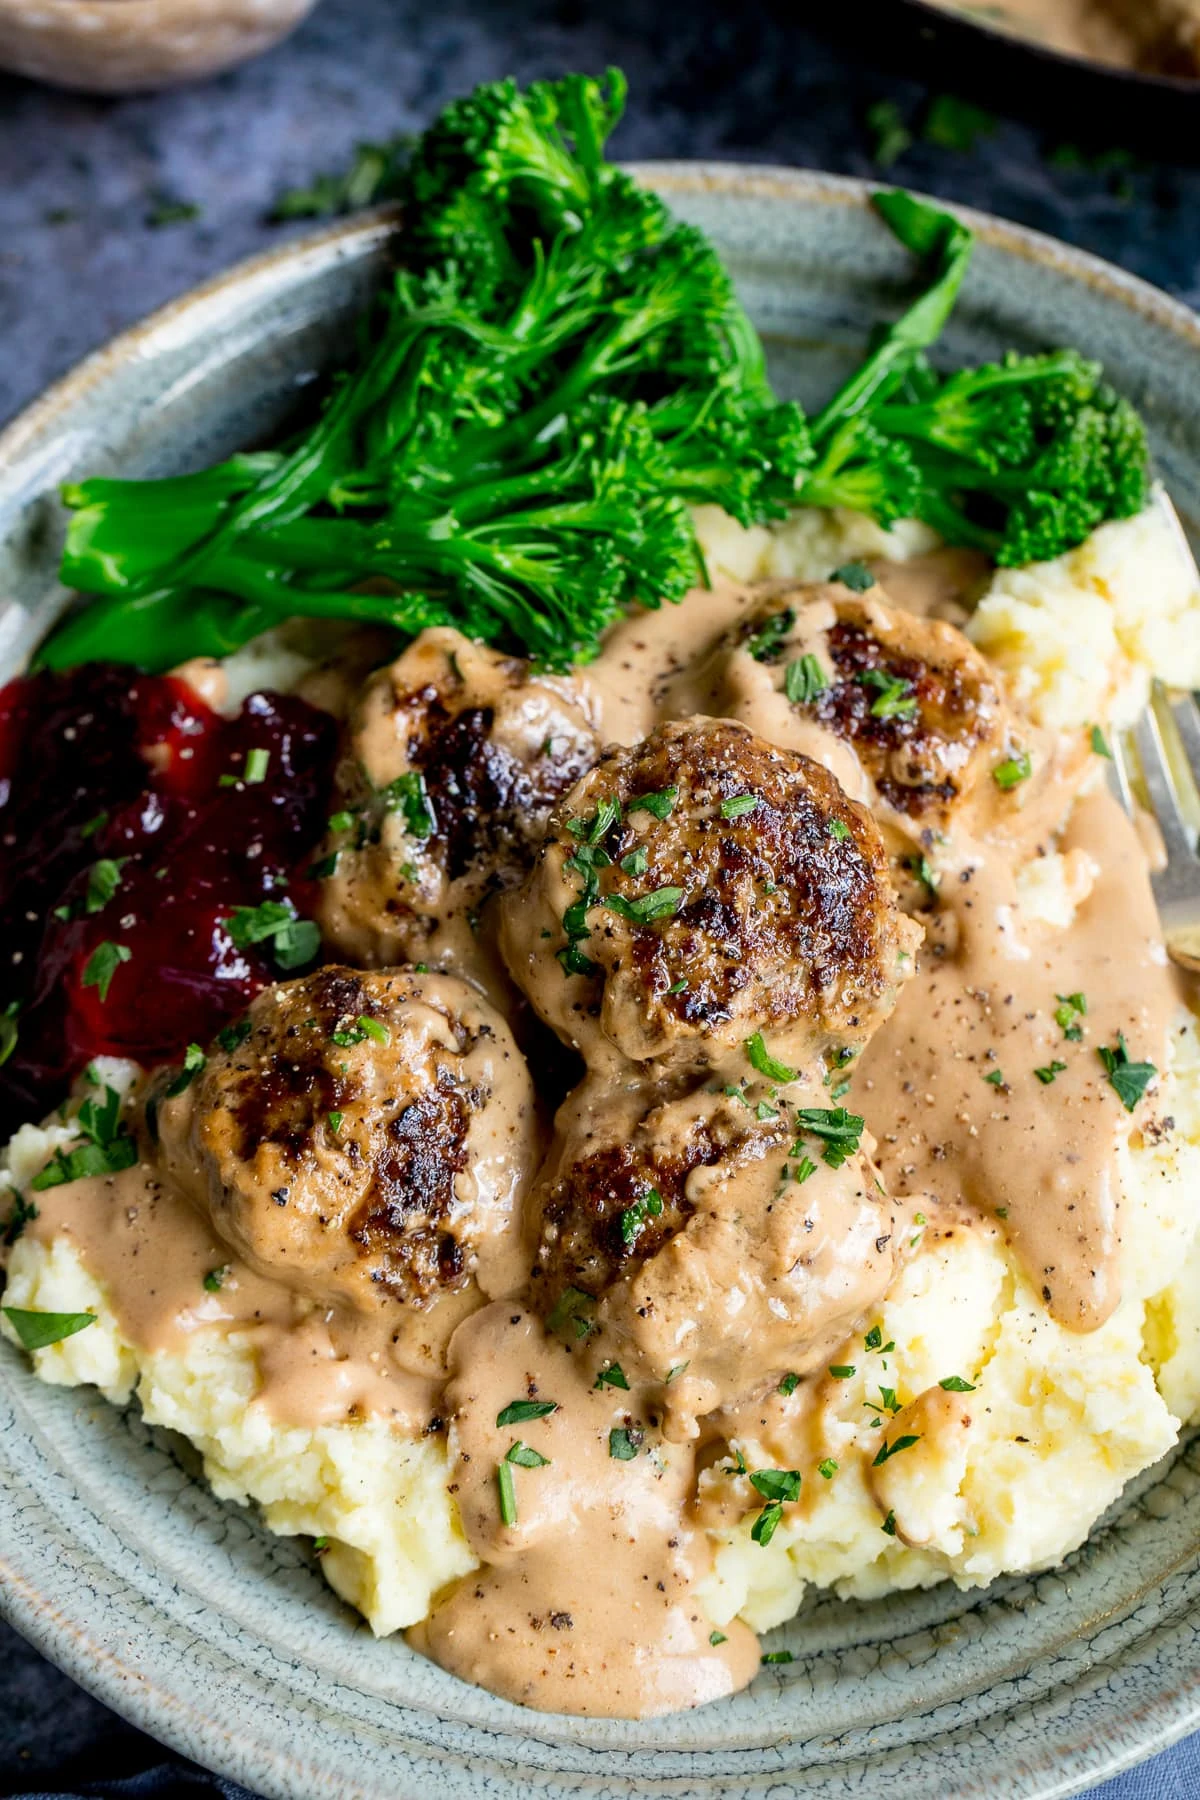 Swedish meatballs on top of mashed potatoes in a bowl with lingonberry jam and broccoli